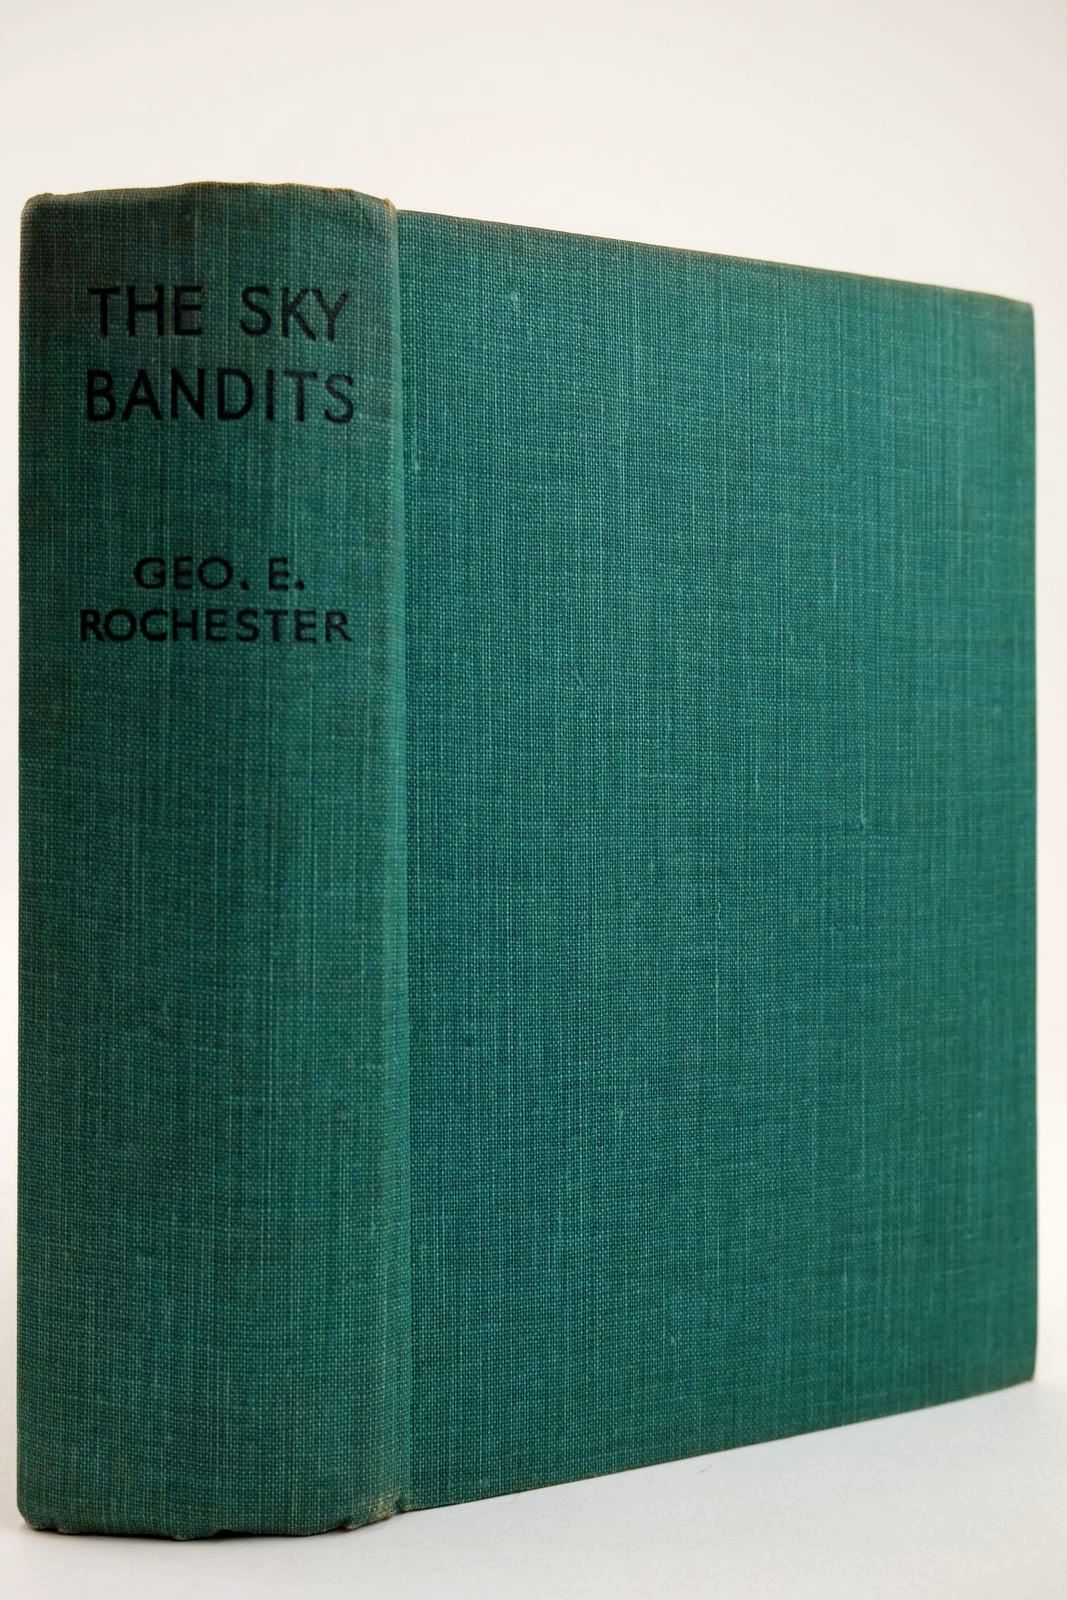 Photo of THE SKY BANDITS written by Rochester, George E. published by The Ace Publishing Company (STOCK CODE: 2132015)  for sale by Stella & Rose's Books